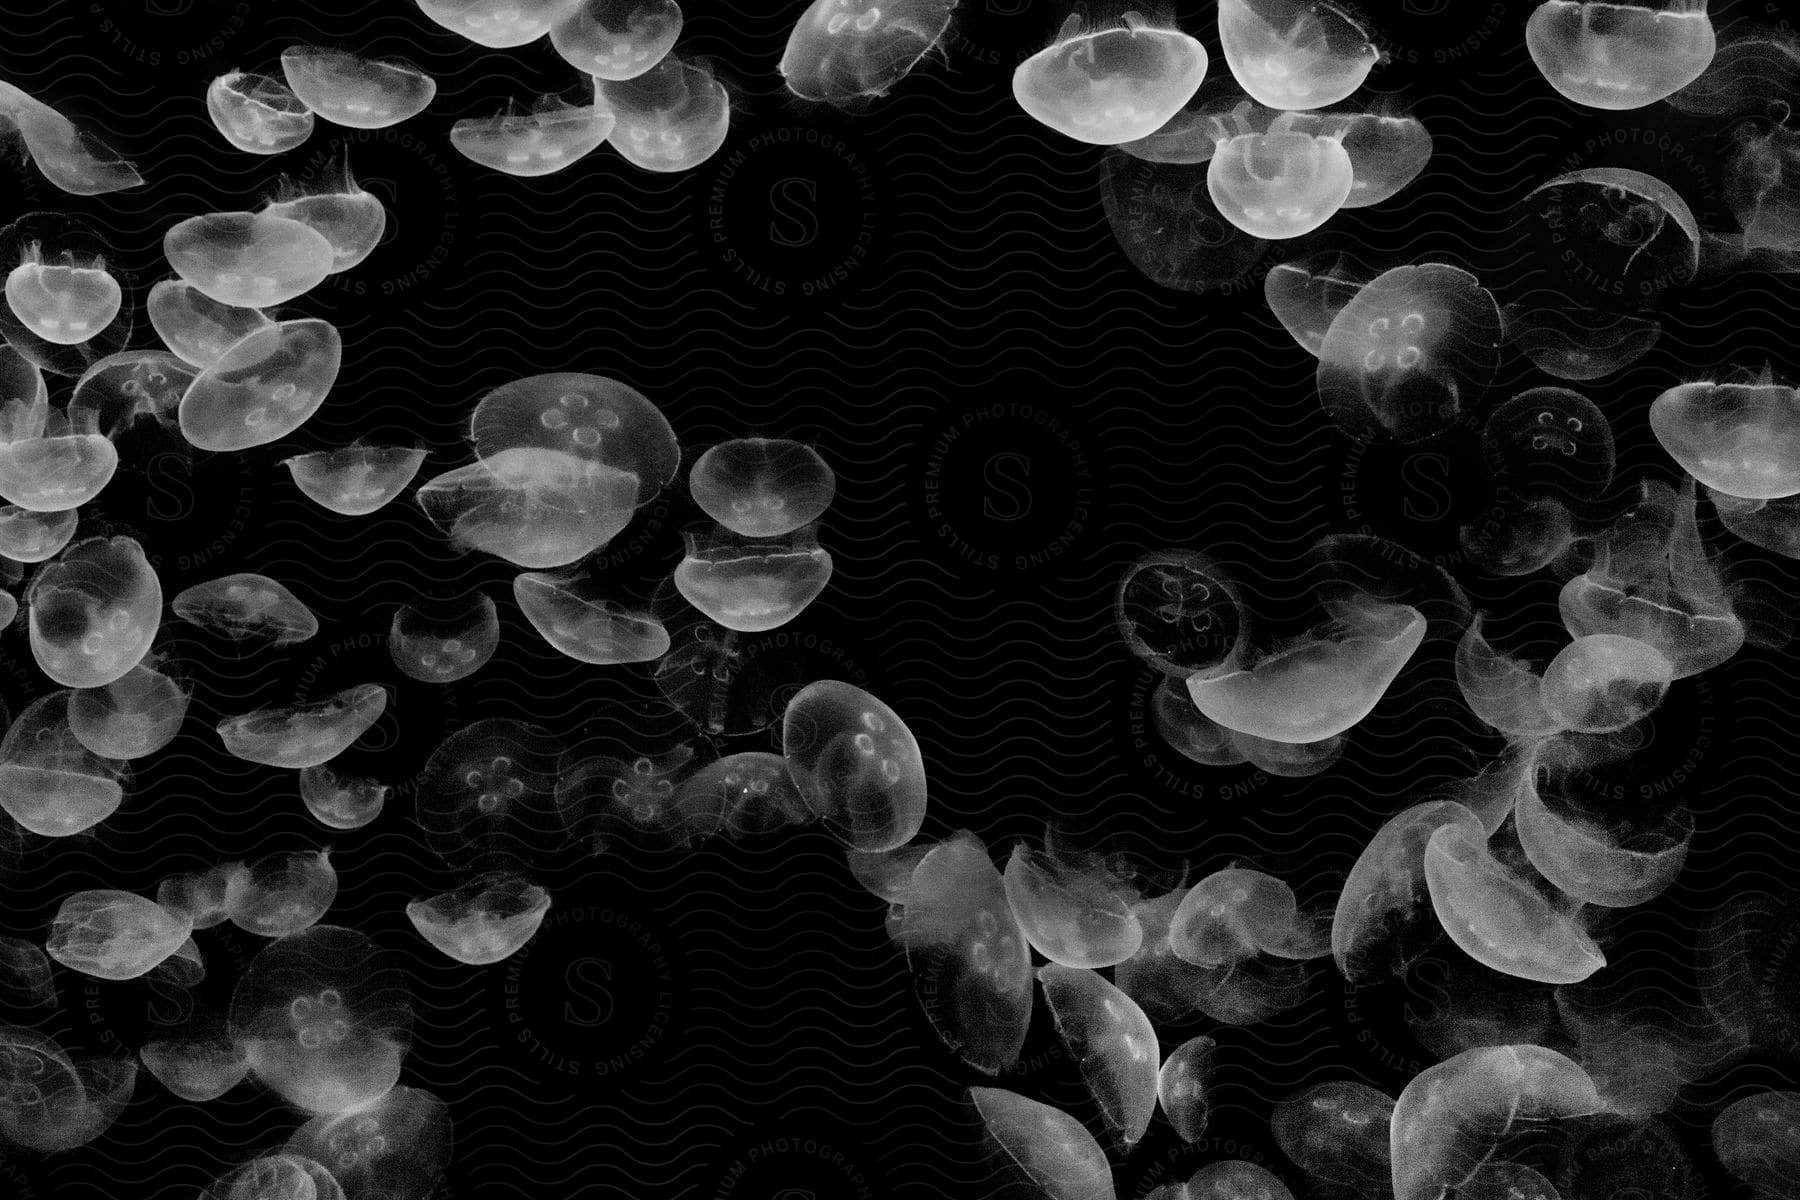 A group of jellyfish swimming underwater